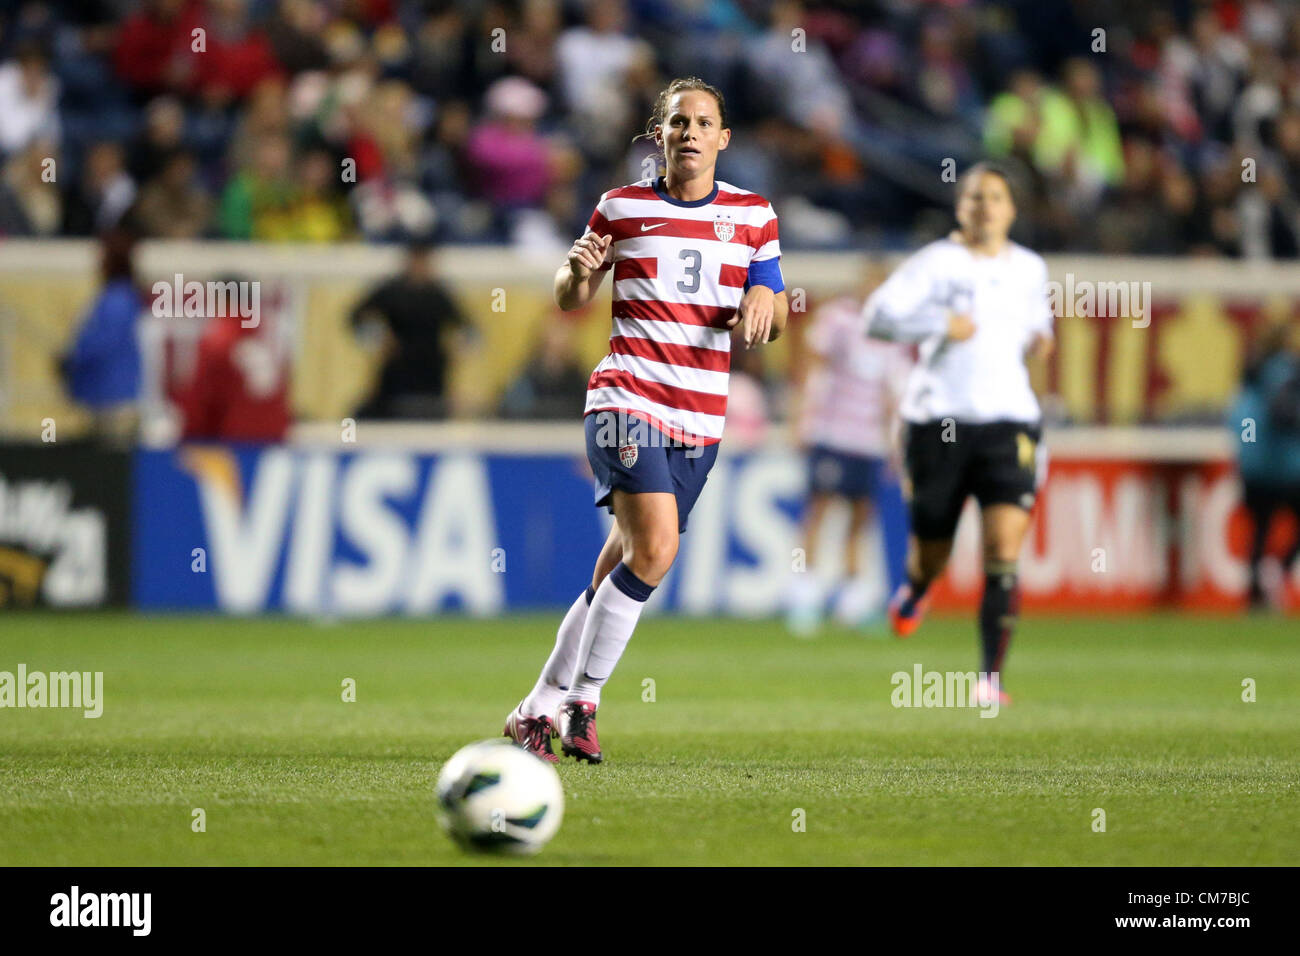 20.10.2012. Chicago, USA.  Christie Rampone (USA). The United States Women's National Team played the Germany Women's National Team at Toyota Park in Bridgeview, Illinois in a women's international friendly soccer match. The game ended in a 1-1 tie. Stock Photo